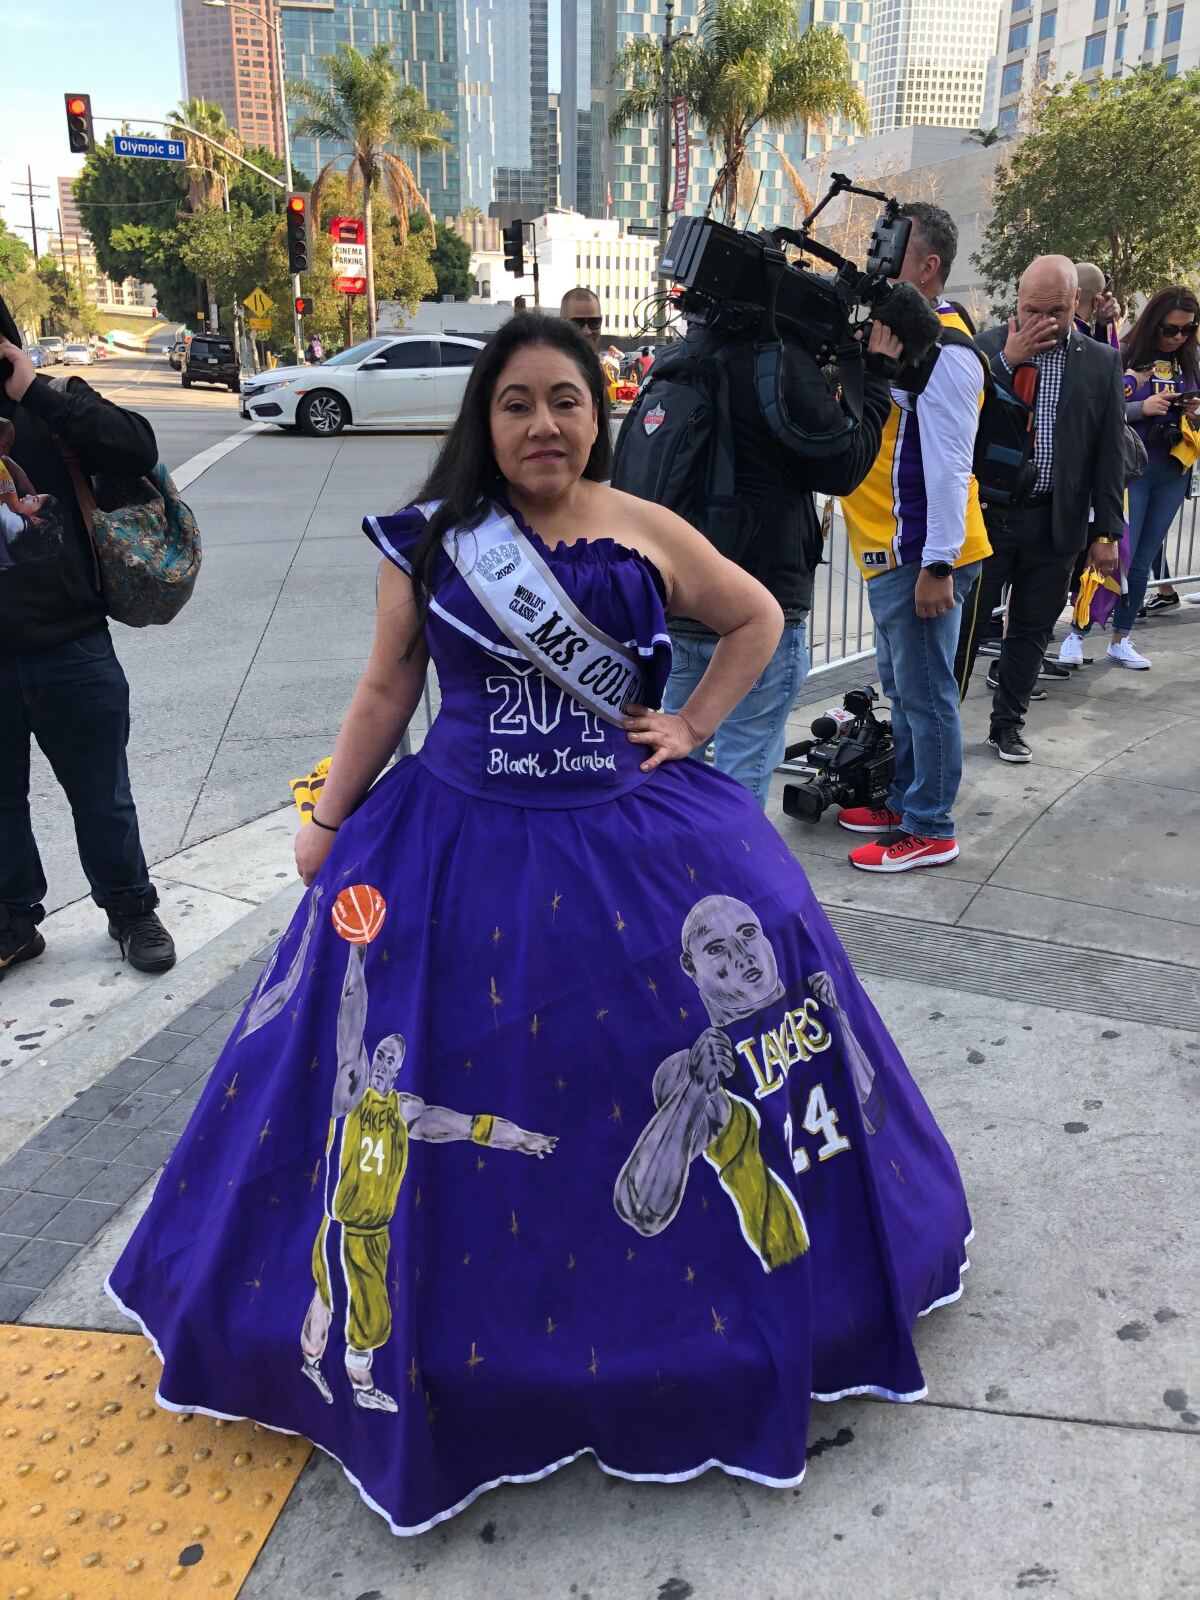 Franchesca Flores, 43, of Littleton, Colo., arrived outside Staples Center in a hand-painted purple ball gown with images of Kobe and Gianna Bryant shooting hoops.